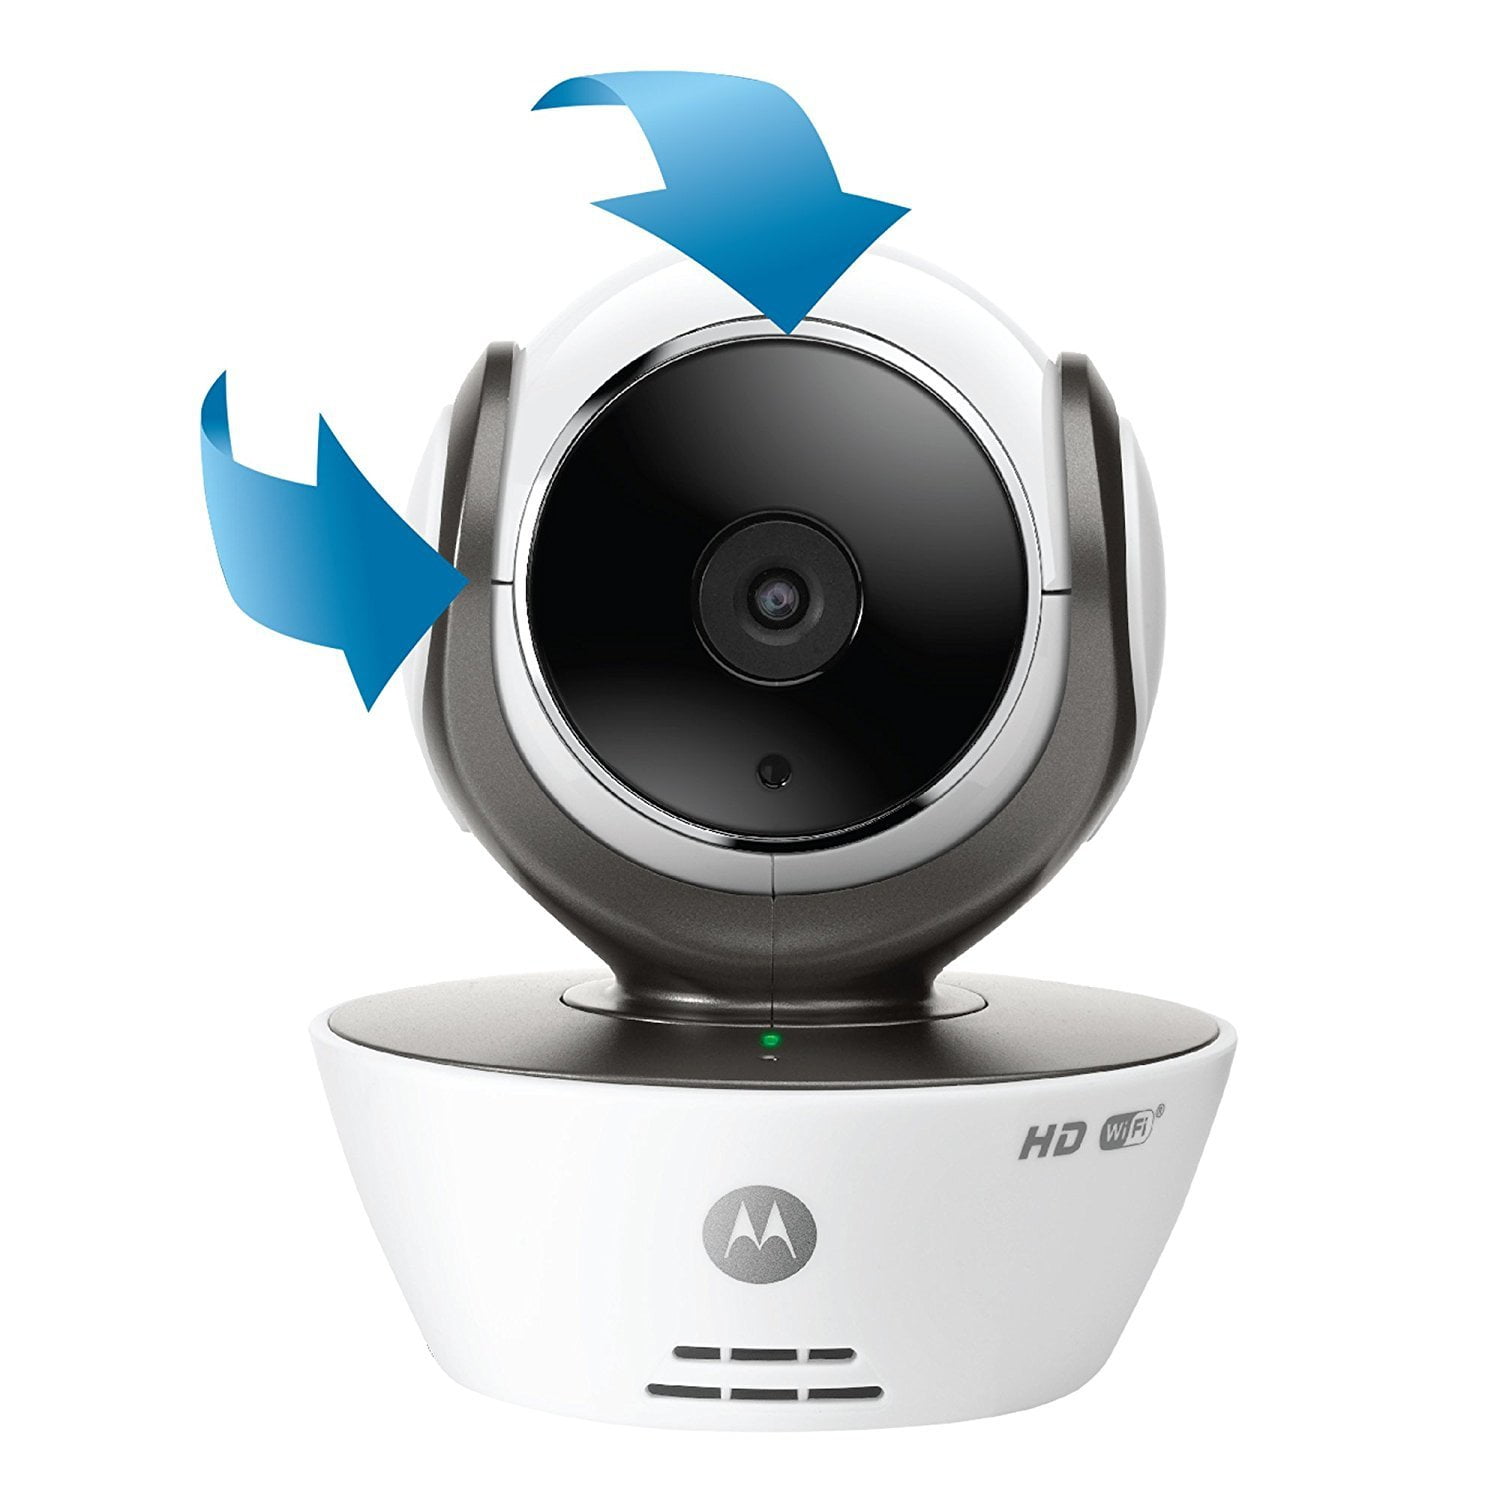 Motorola Mbp854connect 2 Dual Mode Baby Monitor With 2 Cameras And 4 3 Inch Lcd Parent Monitor And Wi Fi Internet Viewing Walmart Com Walmart Com